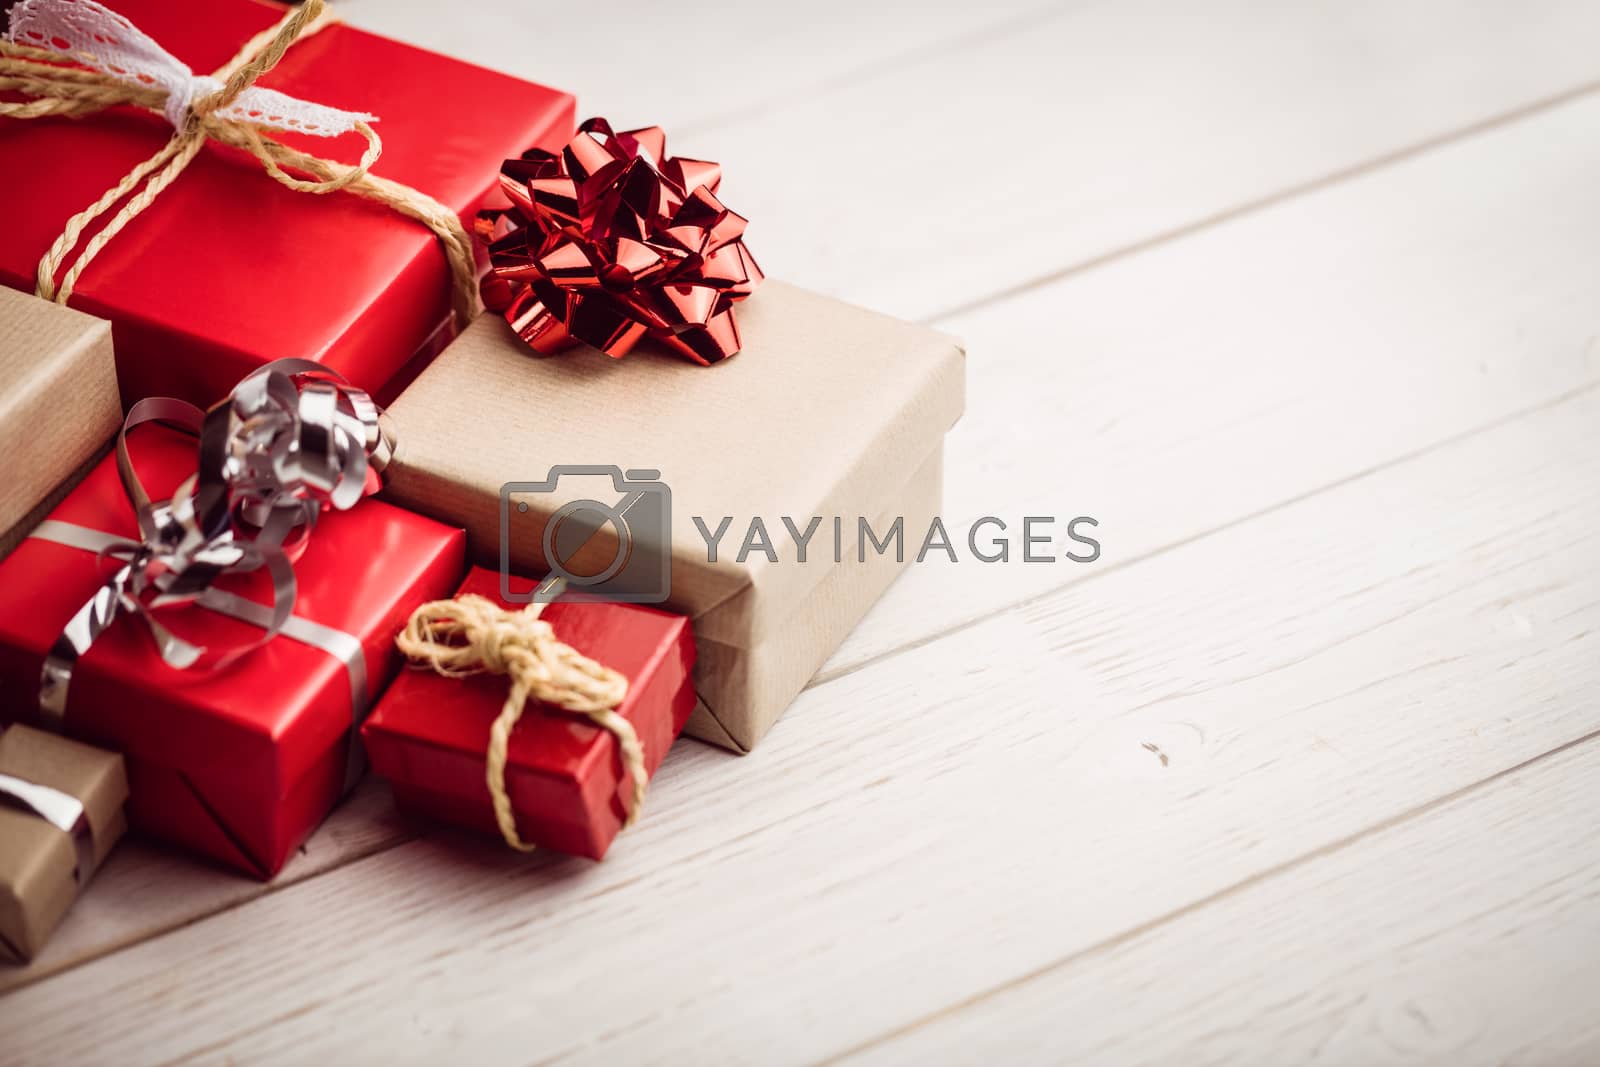 Royalty free image of High angle view of presents by Wavebreakmedia